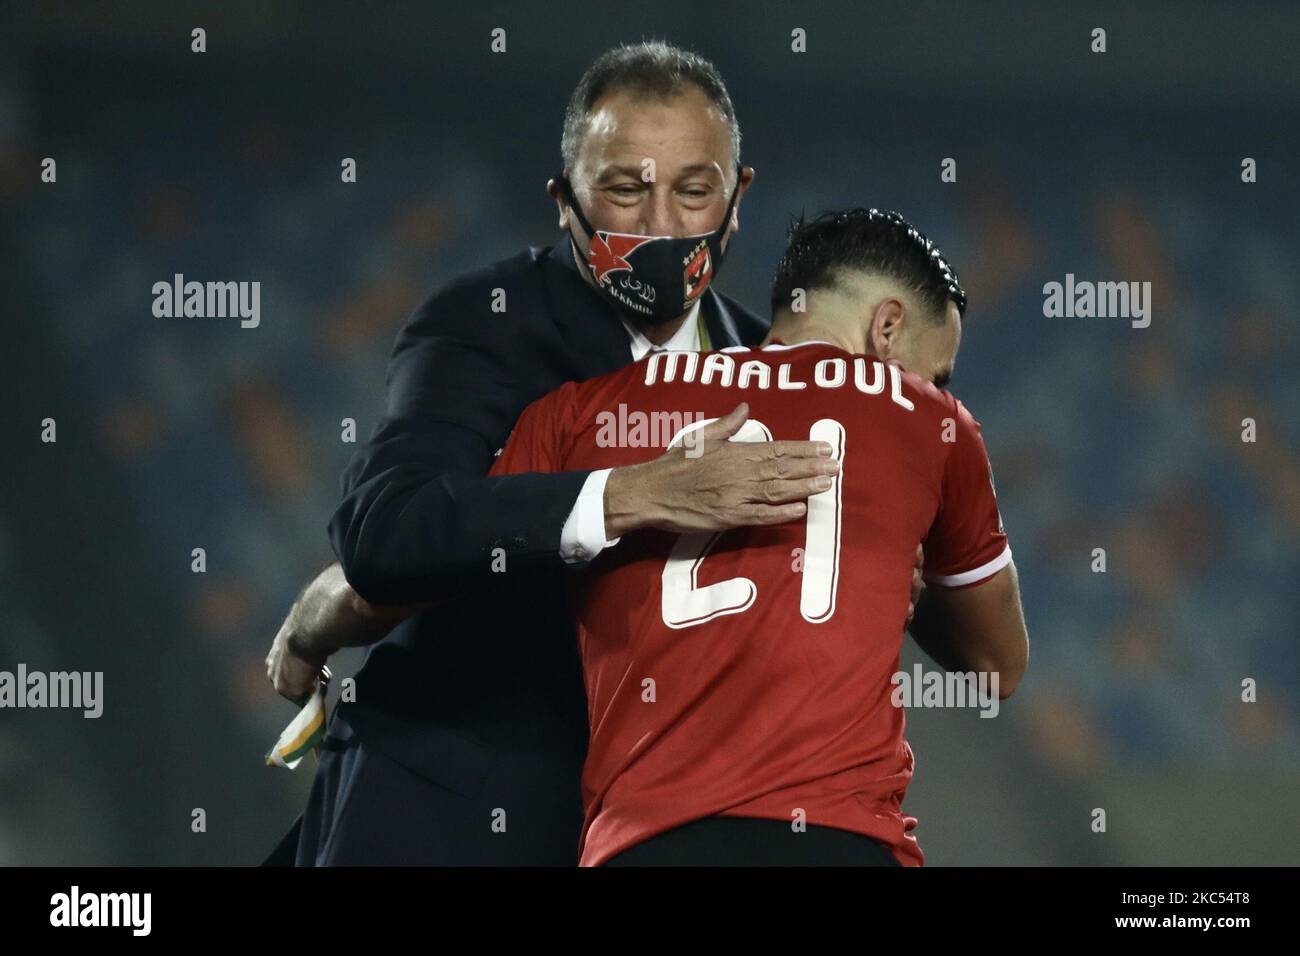 Ali Maaloul of Al Ahly celebrate after winning the final match between Zamalek and Al Ahly at Cairo stadium on 27 November, 2020 in Cairo, Egypt. (Photo by Ahmed Awaad/NurPhoto) Stock Photo